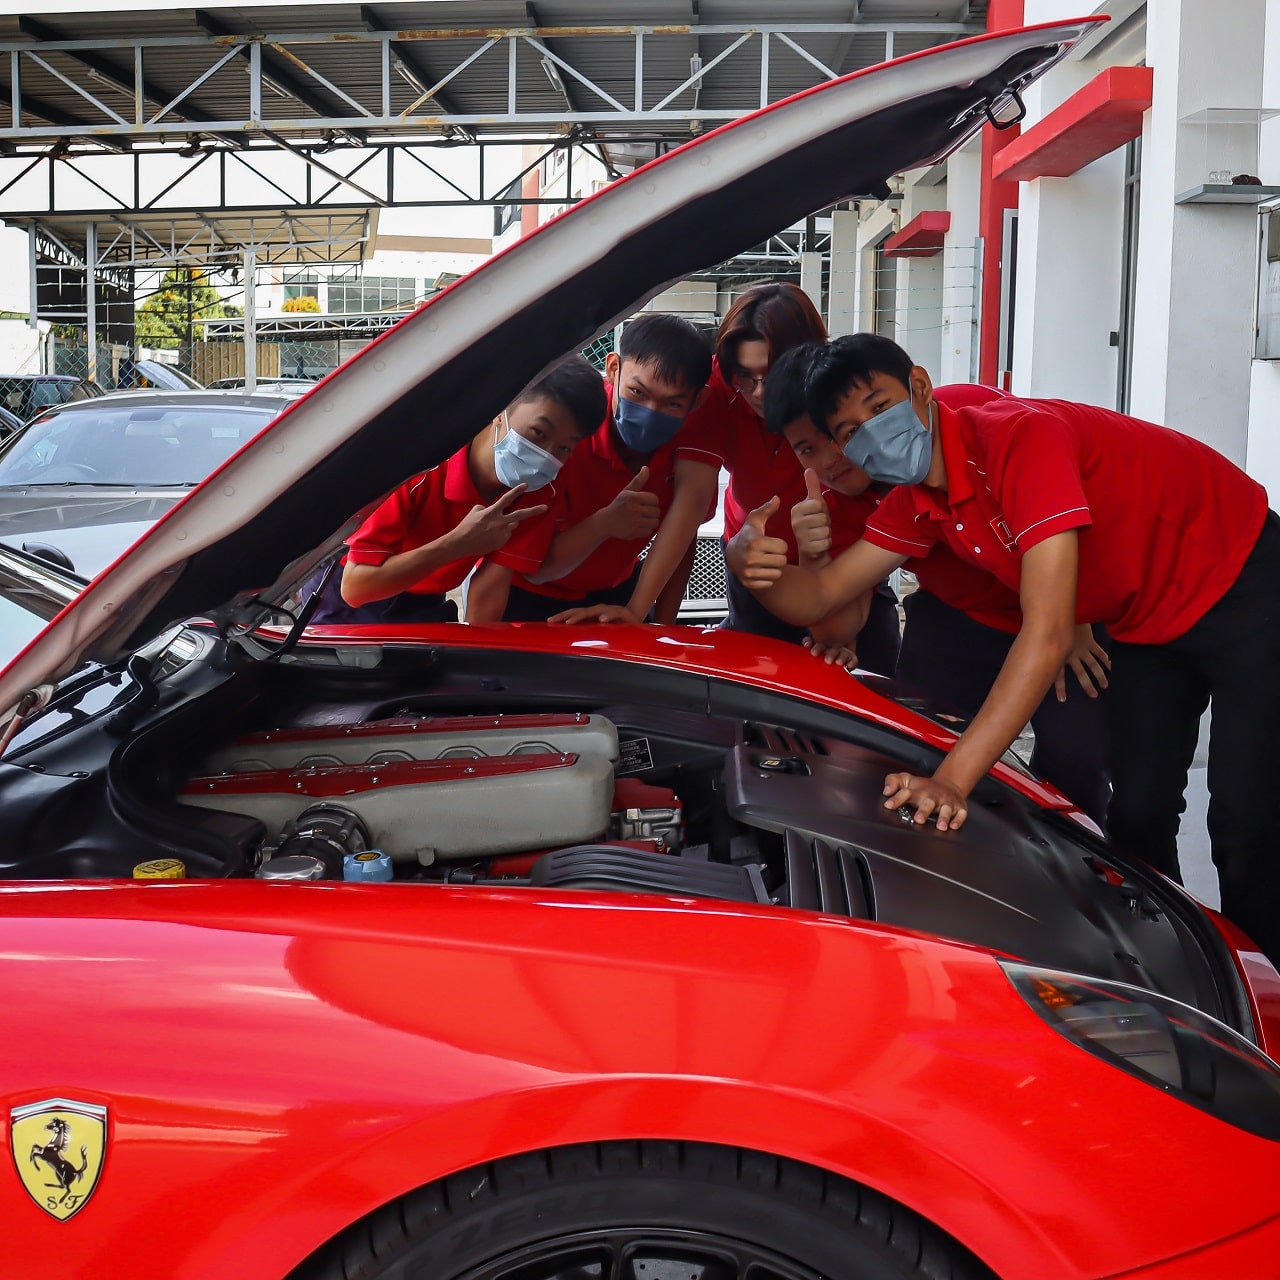 car mechanic course Malaysia - techtra automotive academy Techtra Automotive Academy (Diploma in Automotive Technology) Best Auto College in Malaysia Kuala Lumpur) 2022-2023 Automotive Technology Academy Study Diploma in Malaysia KL Kuala Lumpur - Techtra Automotive College in Malaysia